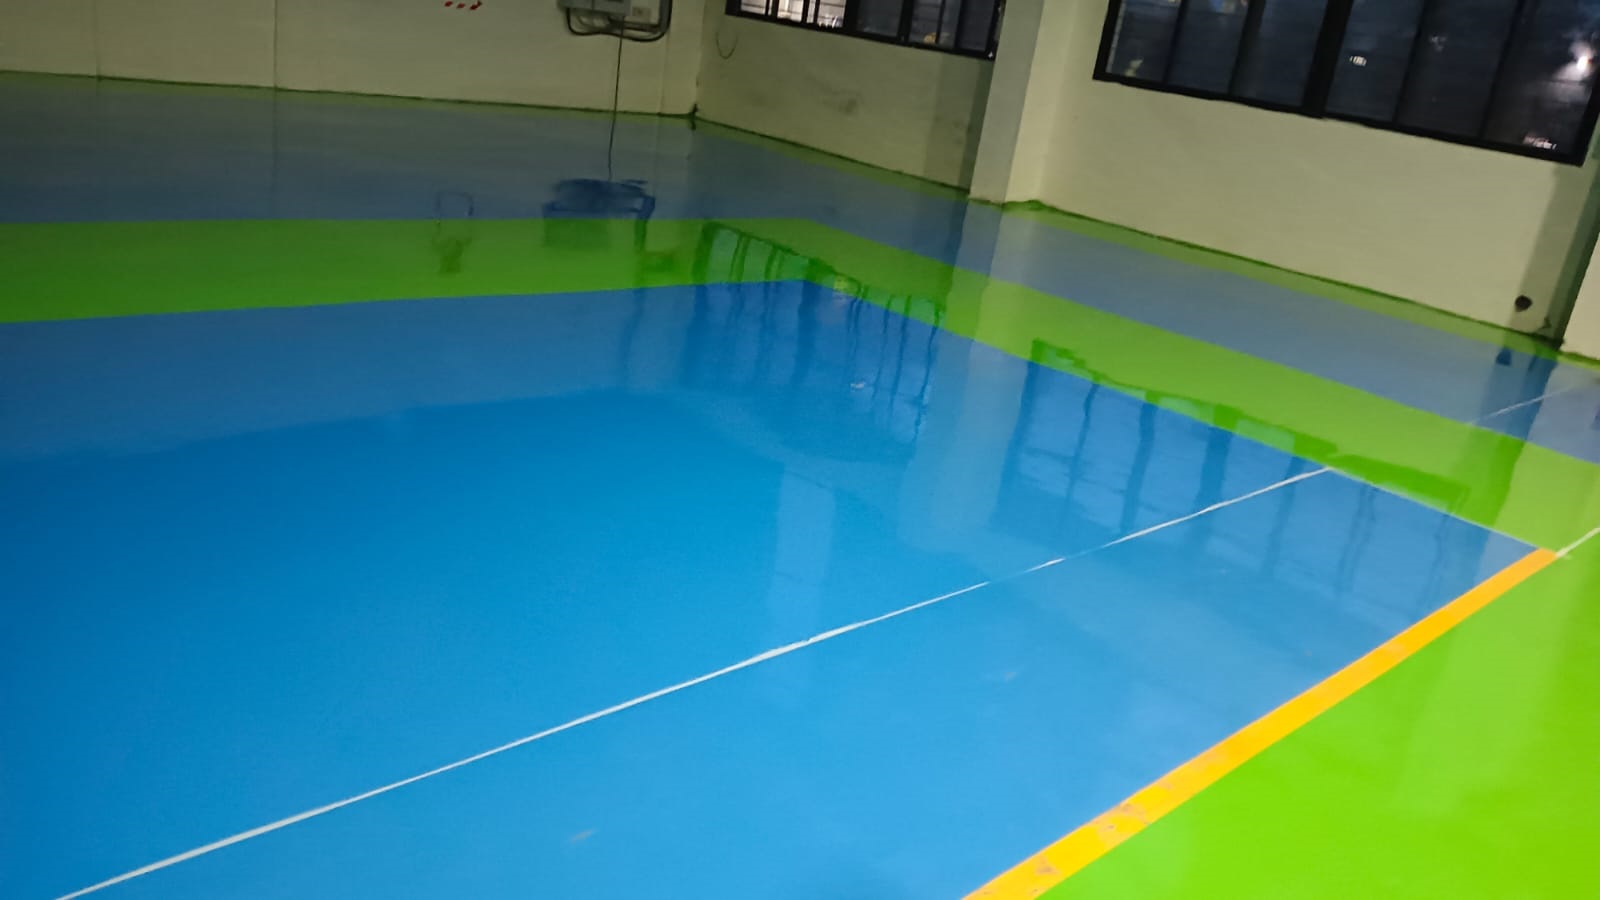 Epoxy flooring work by Y S Constrotech